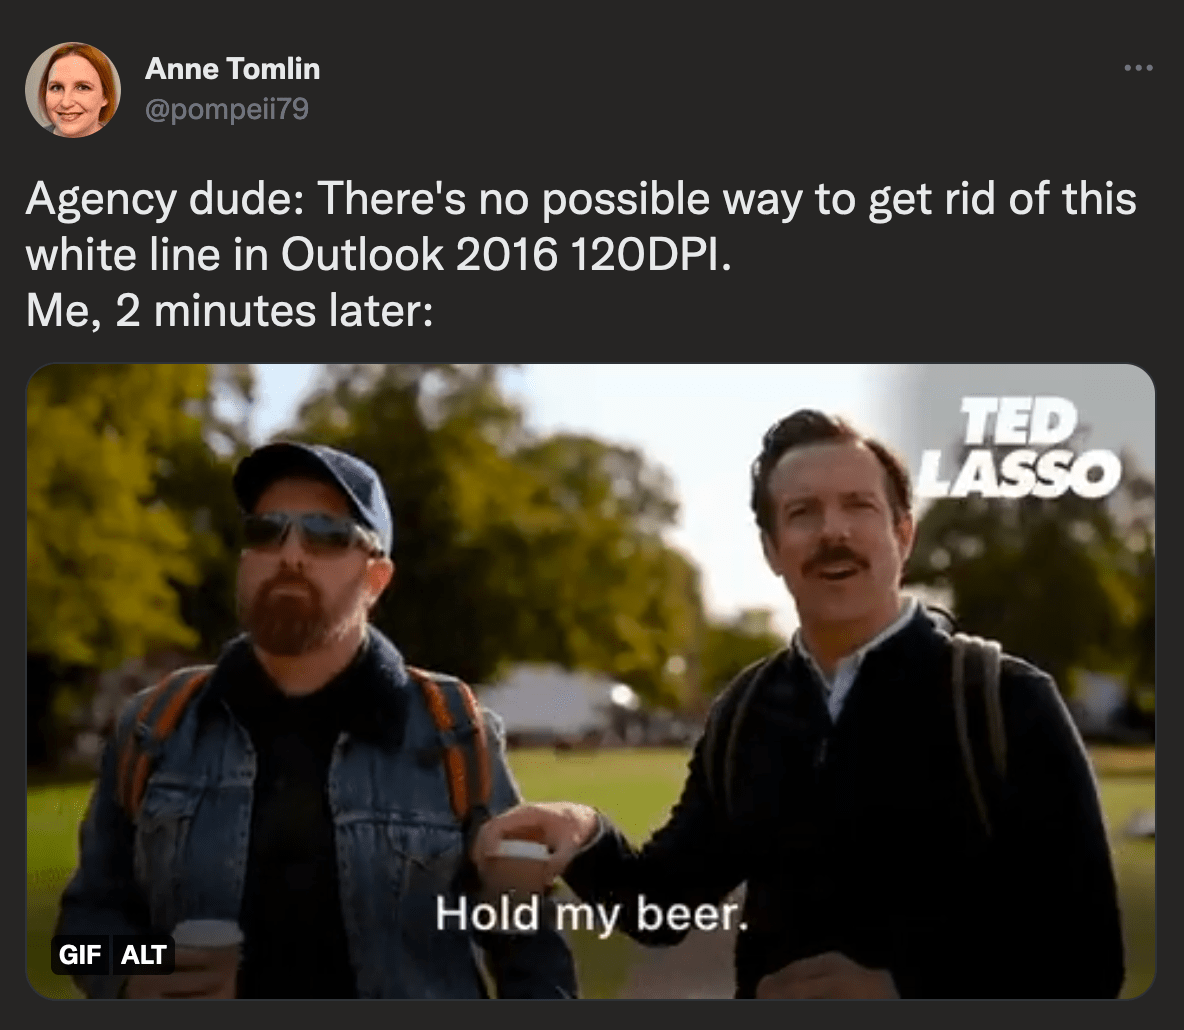 @pompeii79 on Twitter: Agency dude: There's no possible way to get rid of this white line in Outlook 2016DPI. Me, 2 minutes later: GIF from Ted Lasso, Ted passing his beer to Coach Beard saying Hold my beer.